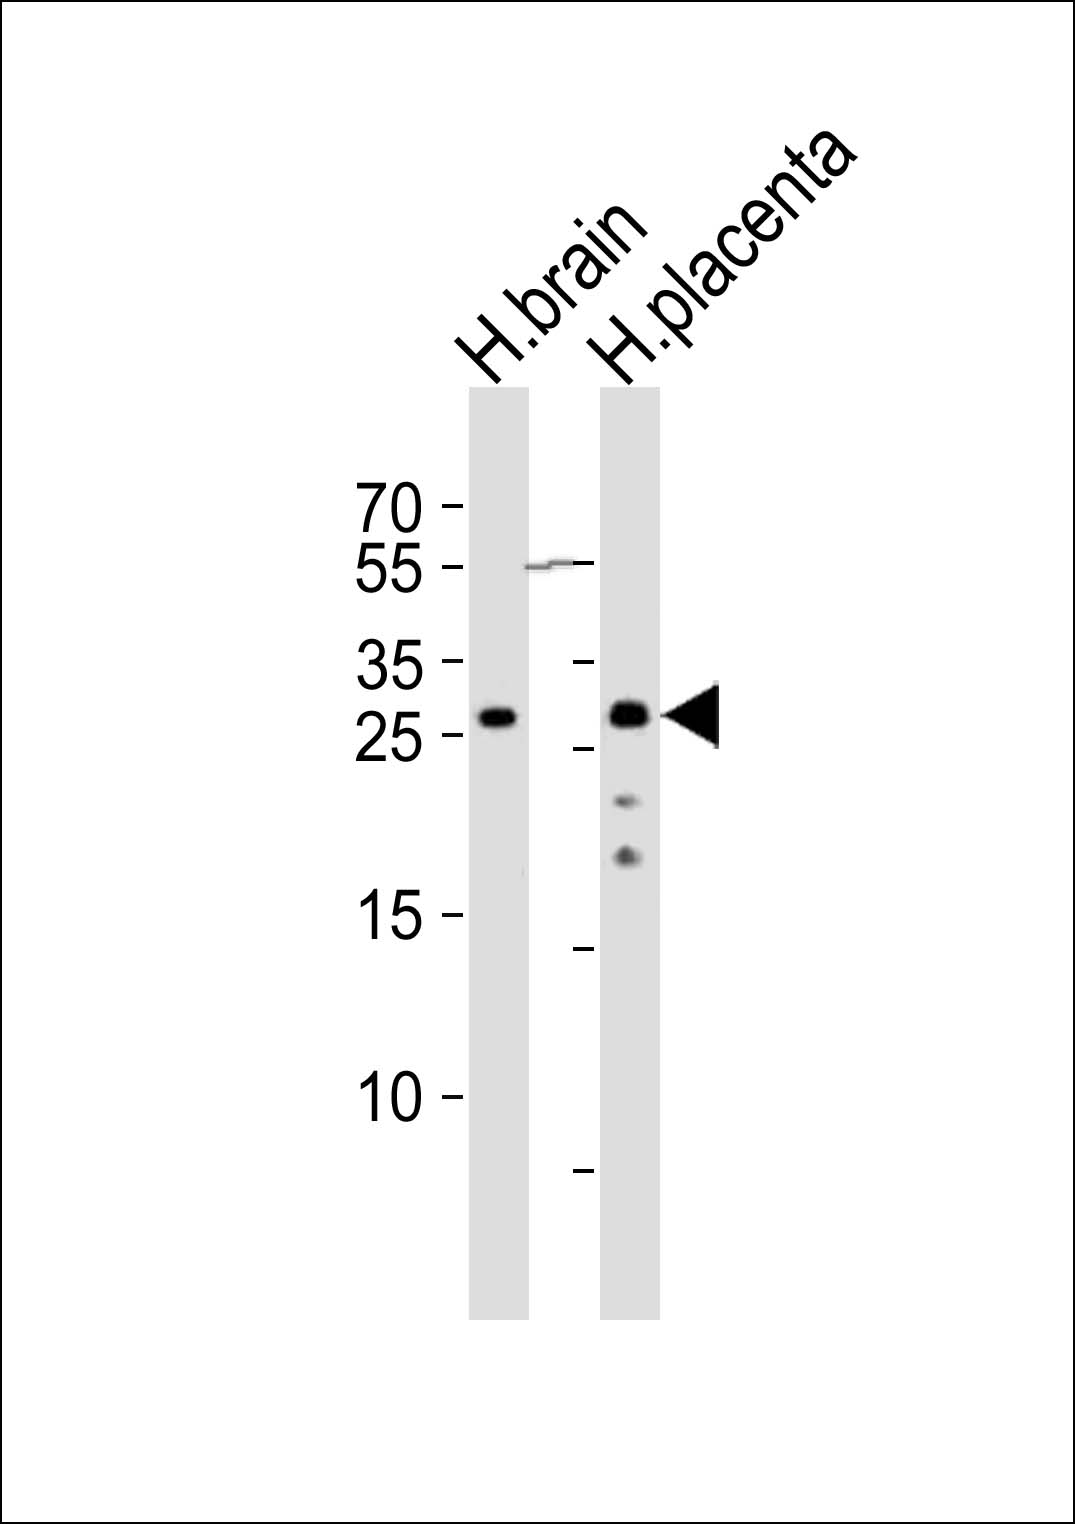 Western blot analysis of lysates from human brain and human placenta tissue (from left to right),  using CHMP4A Antibody (C-term)(Cat.  #AP21067a).  AP21067a was diluted at 1:1000 at each lane.  A goat anti-rabbit IgG H&L(HRP) at 1:10000 dilution was used as the secondary antibody. Lysates at 20ug per lane.